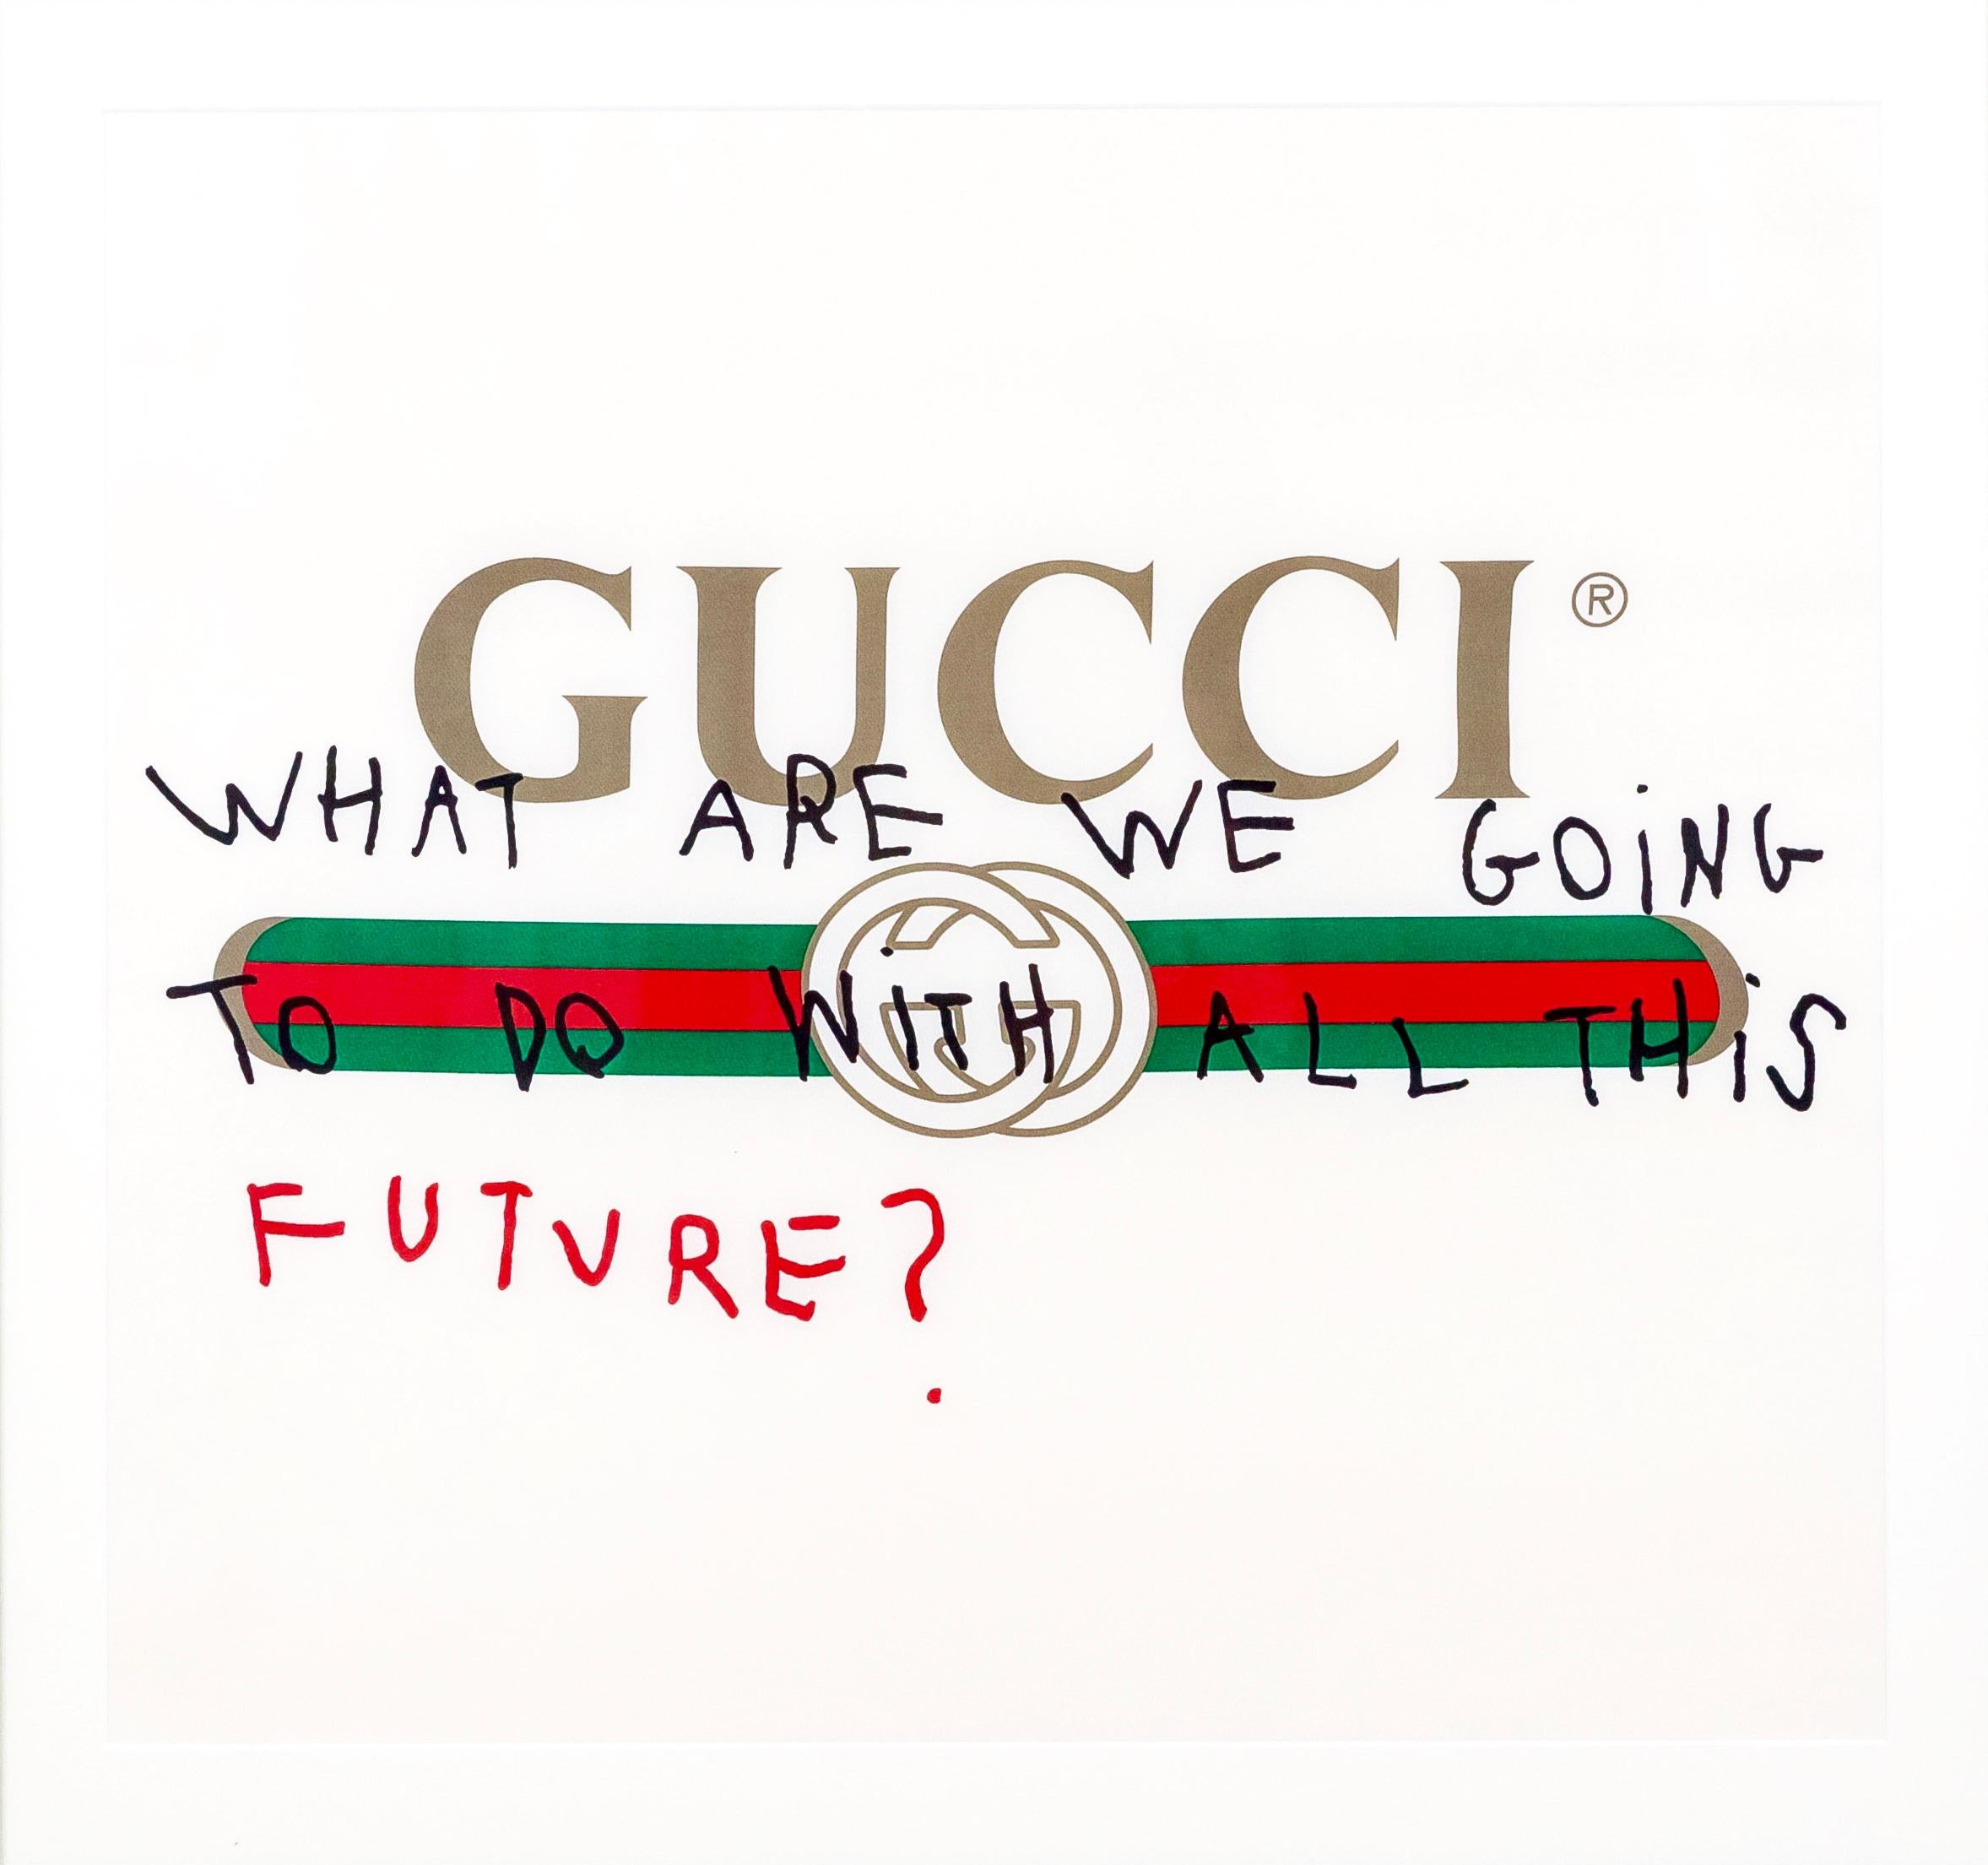 Gucci Coco Capitán logo silk scarf in bespoke frame

Winter 2017, artist Coco Capitán collaborated with Gucci on a special range of accessories and ready-to-wear that feature her signature phrases. The ironic and witty handwritten aphorisms appear